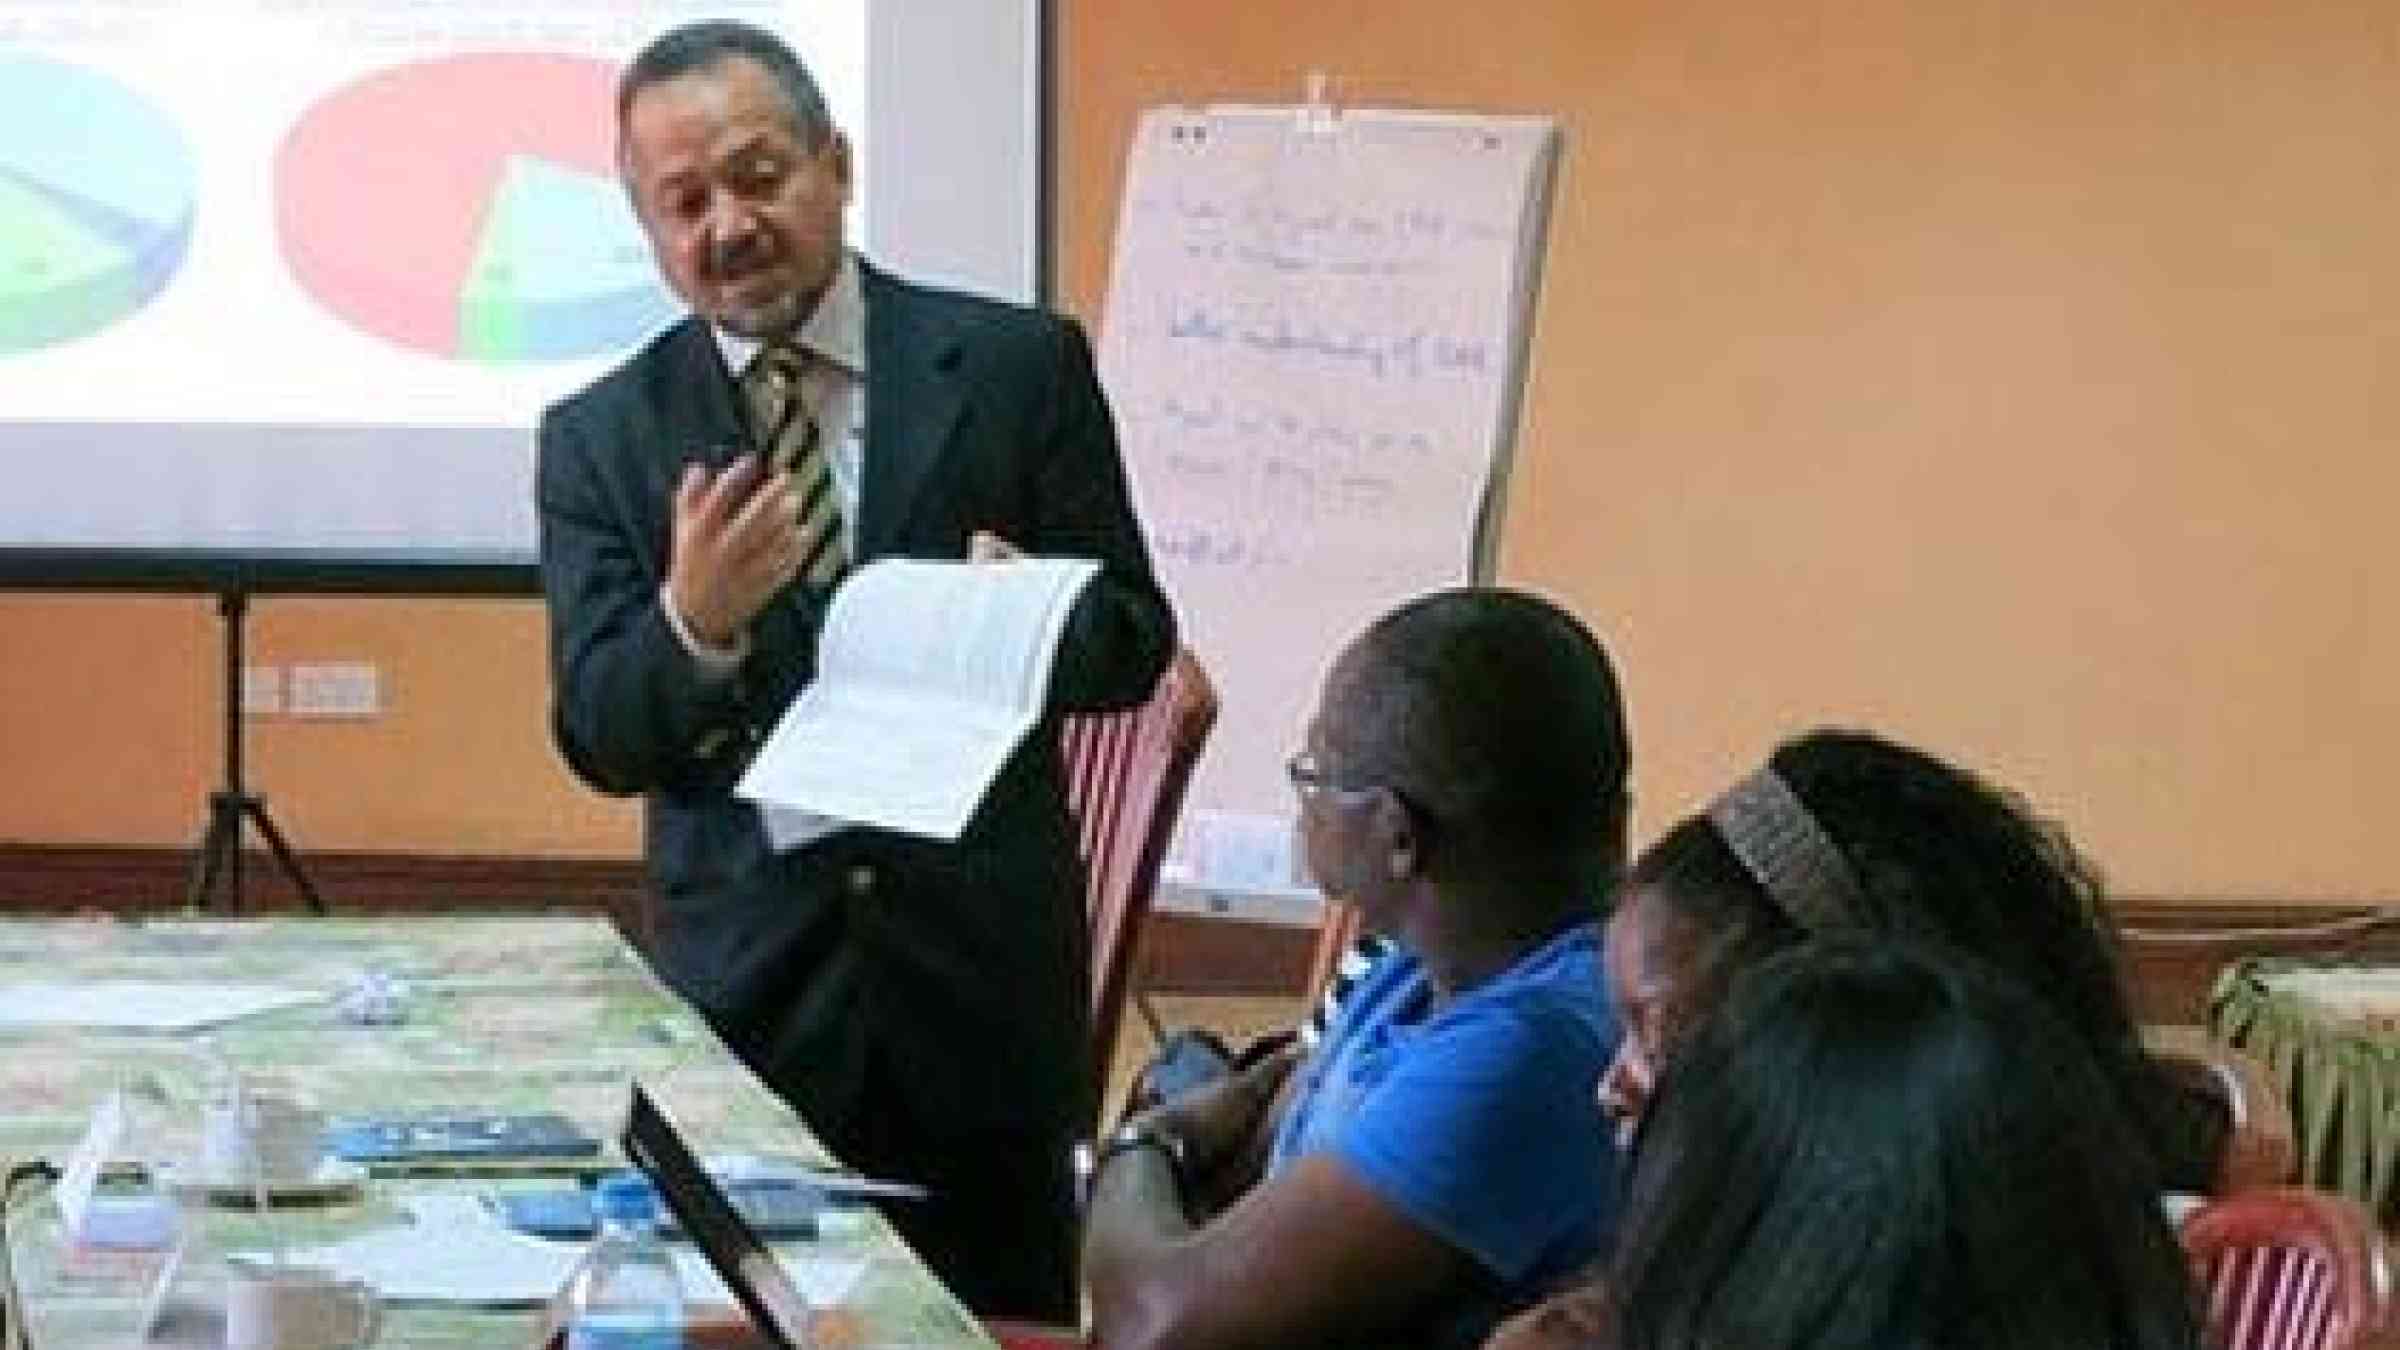 Former UNISDR Head of Africa, Pedro Basabe, speaking to journalists at an ECHO-sponsored media training during the 4th Africa Regional Platform in Arusha, Tanzania. This year, the 5th Africa Regional Platform will be held in Abuja, Nigeria on 13-16 May, where climate change is expected to take center stage.